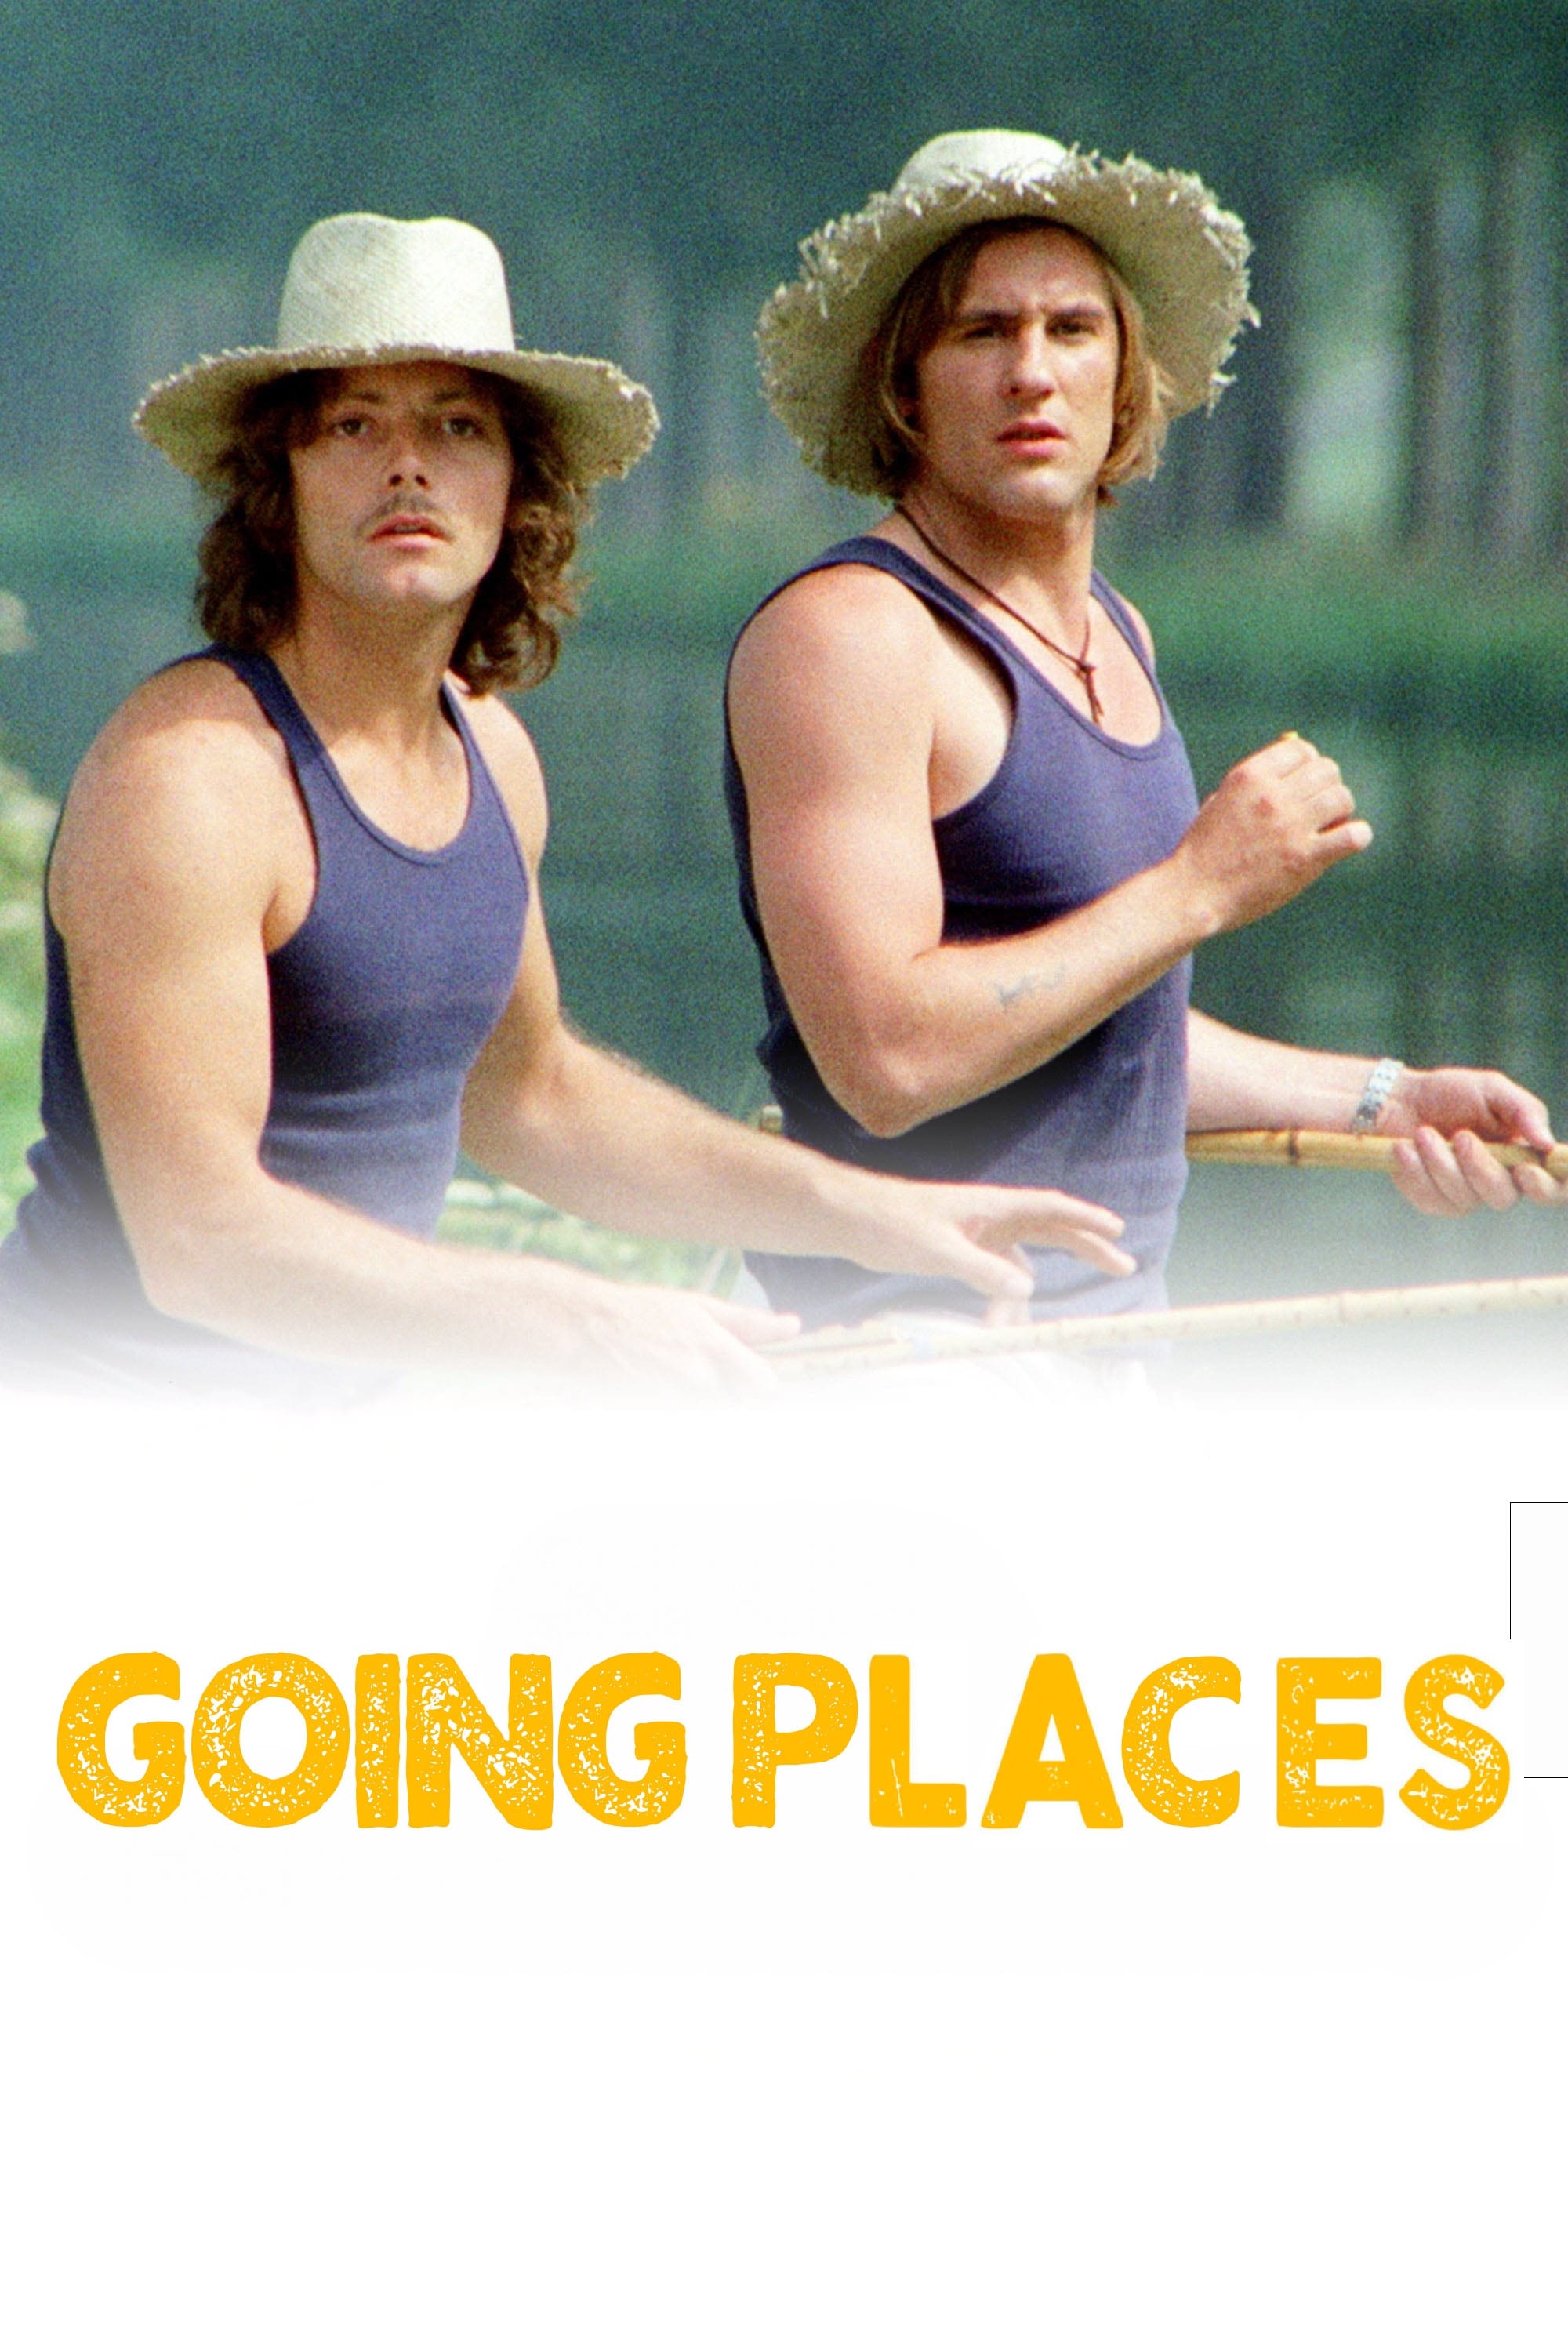 Going Places (1974)